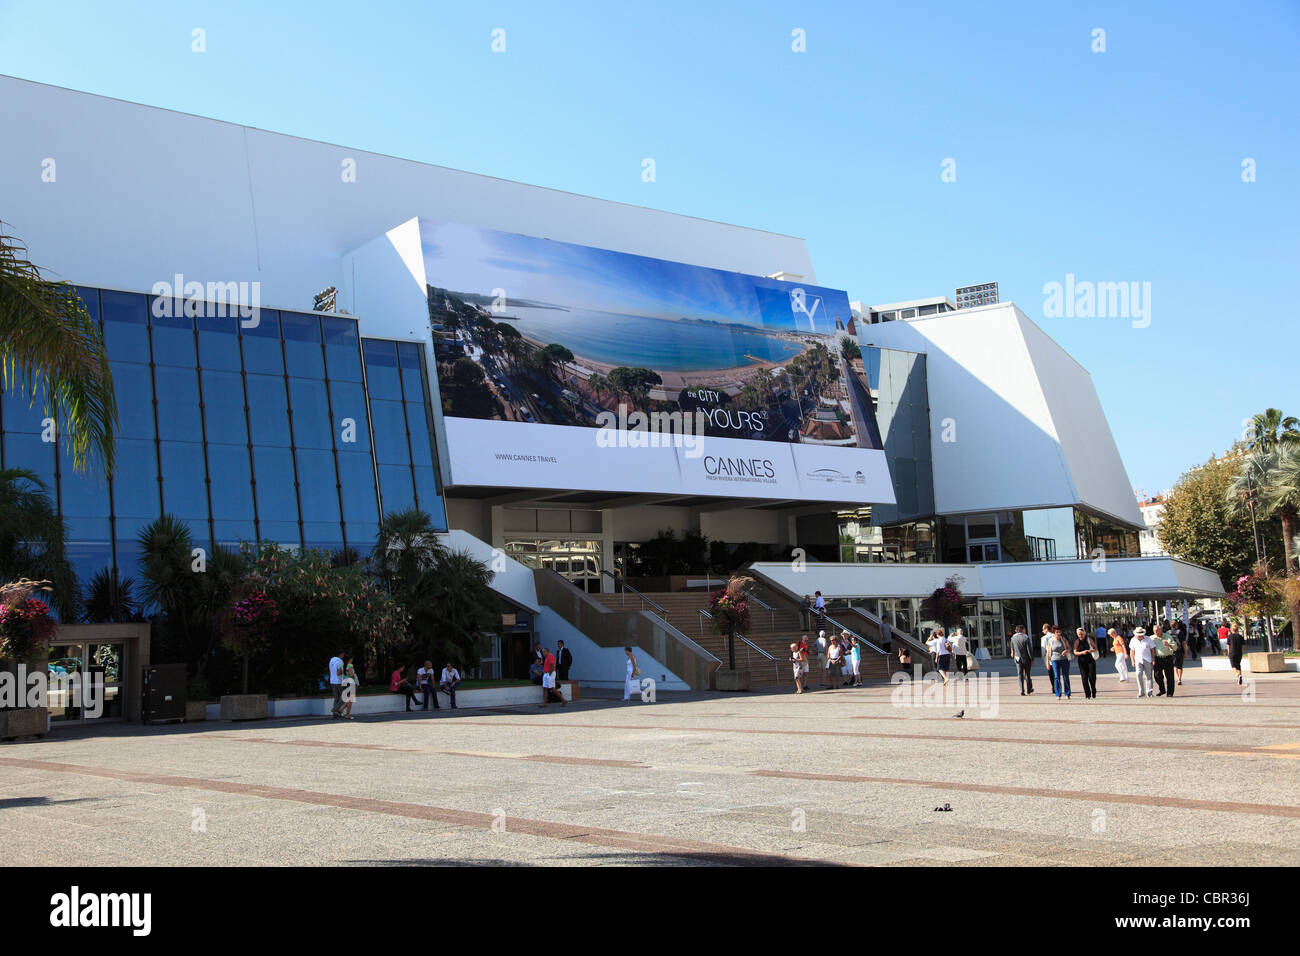 Palais des Festivals, where the Cannes Film Festival is held, Cannes, Cote d'Azur, French Riviera, Provence, France, Europe Stock Photo